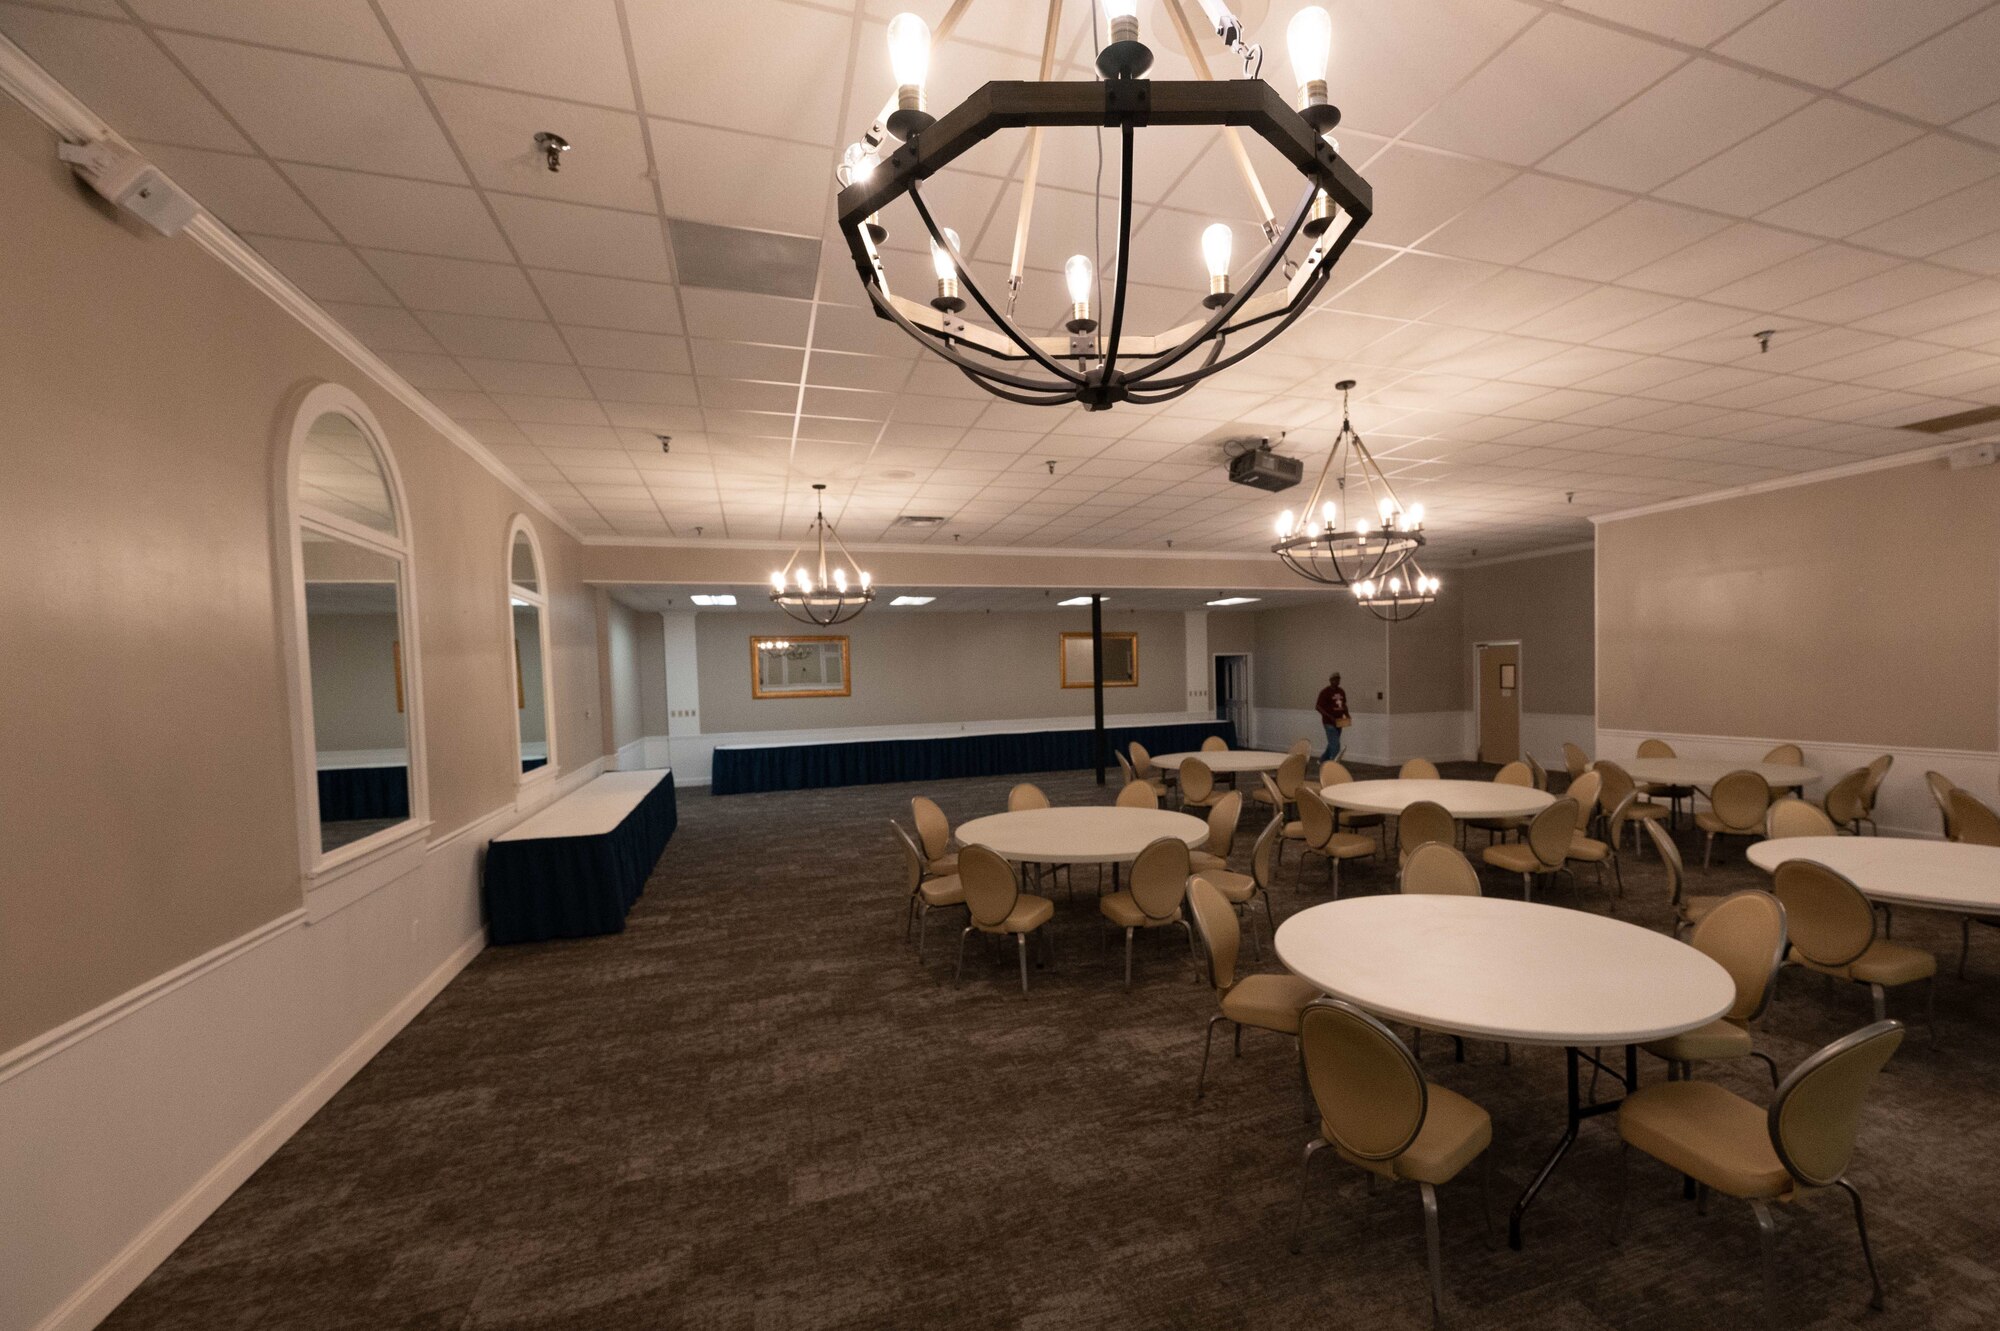 The ballroom at the Carolina Skies Club is completed.